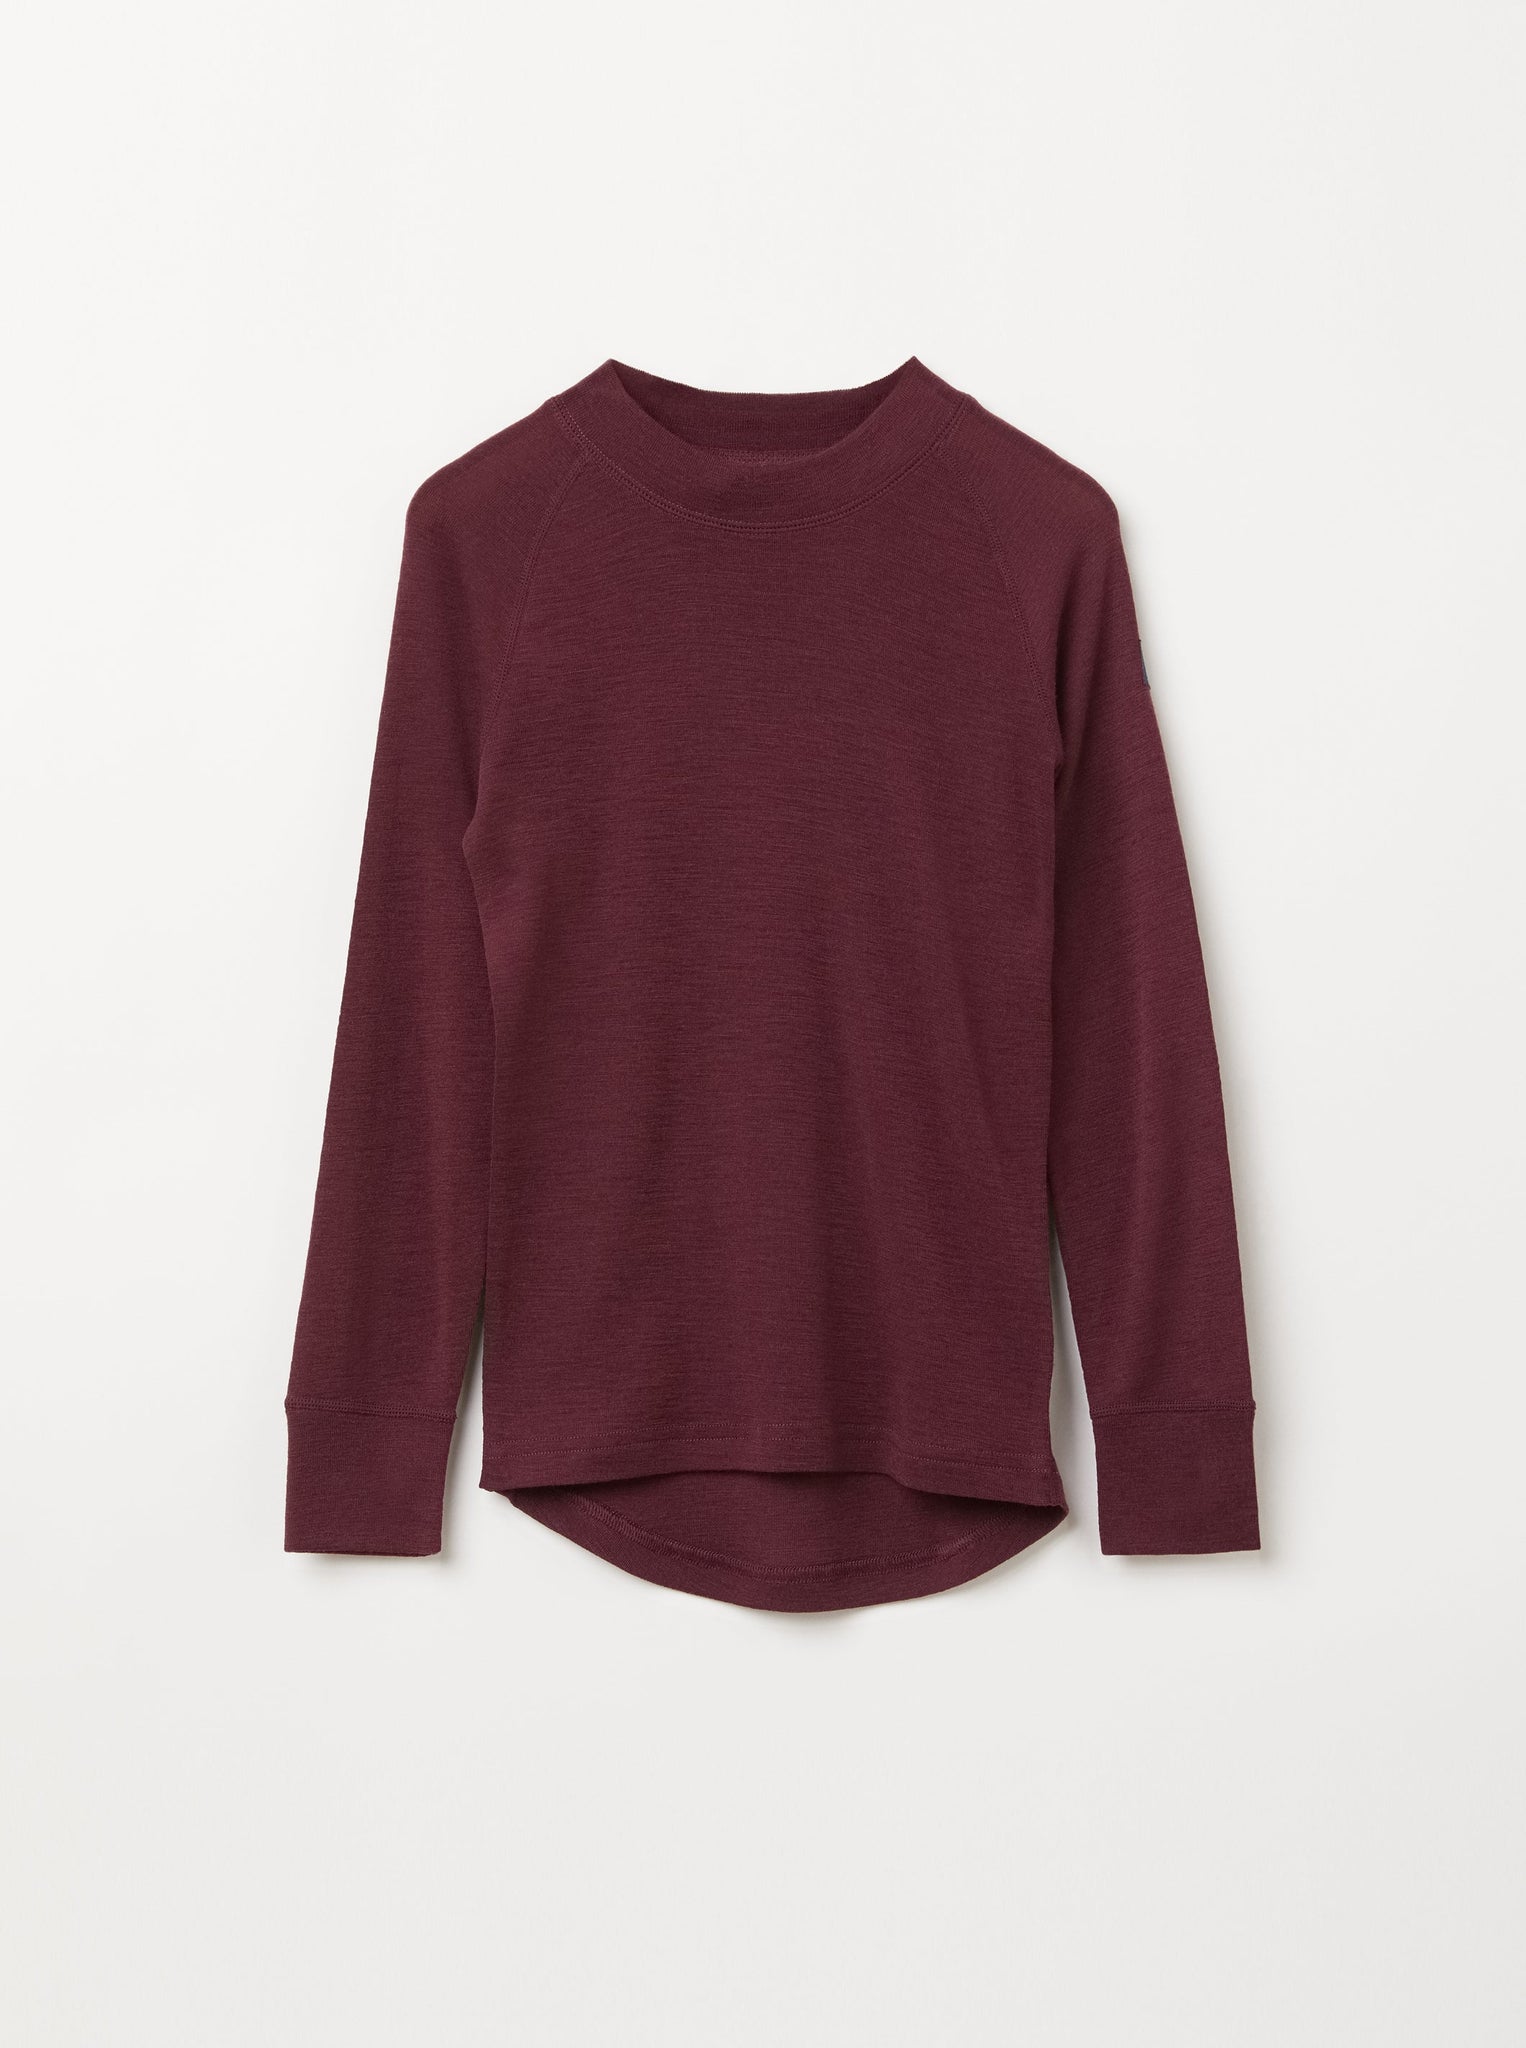 Merino Wool Burgundy Thermal Kids Top from the Polarn O. Pyret kidswear collection. Sustainably produced kids outerwear.